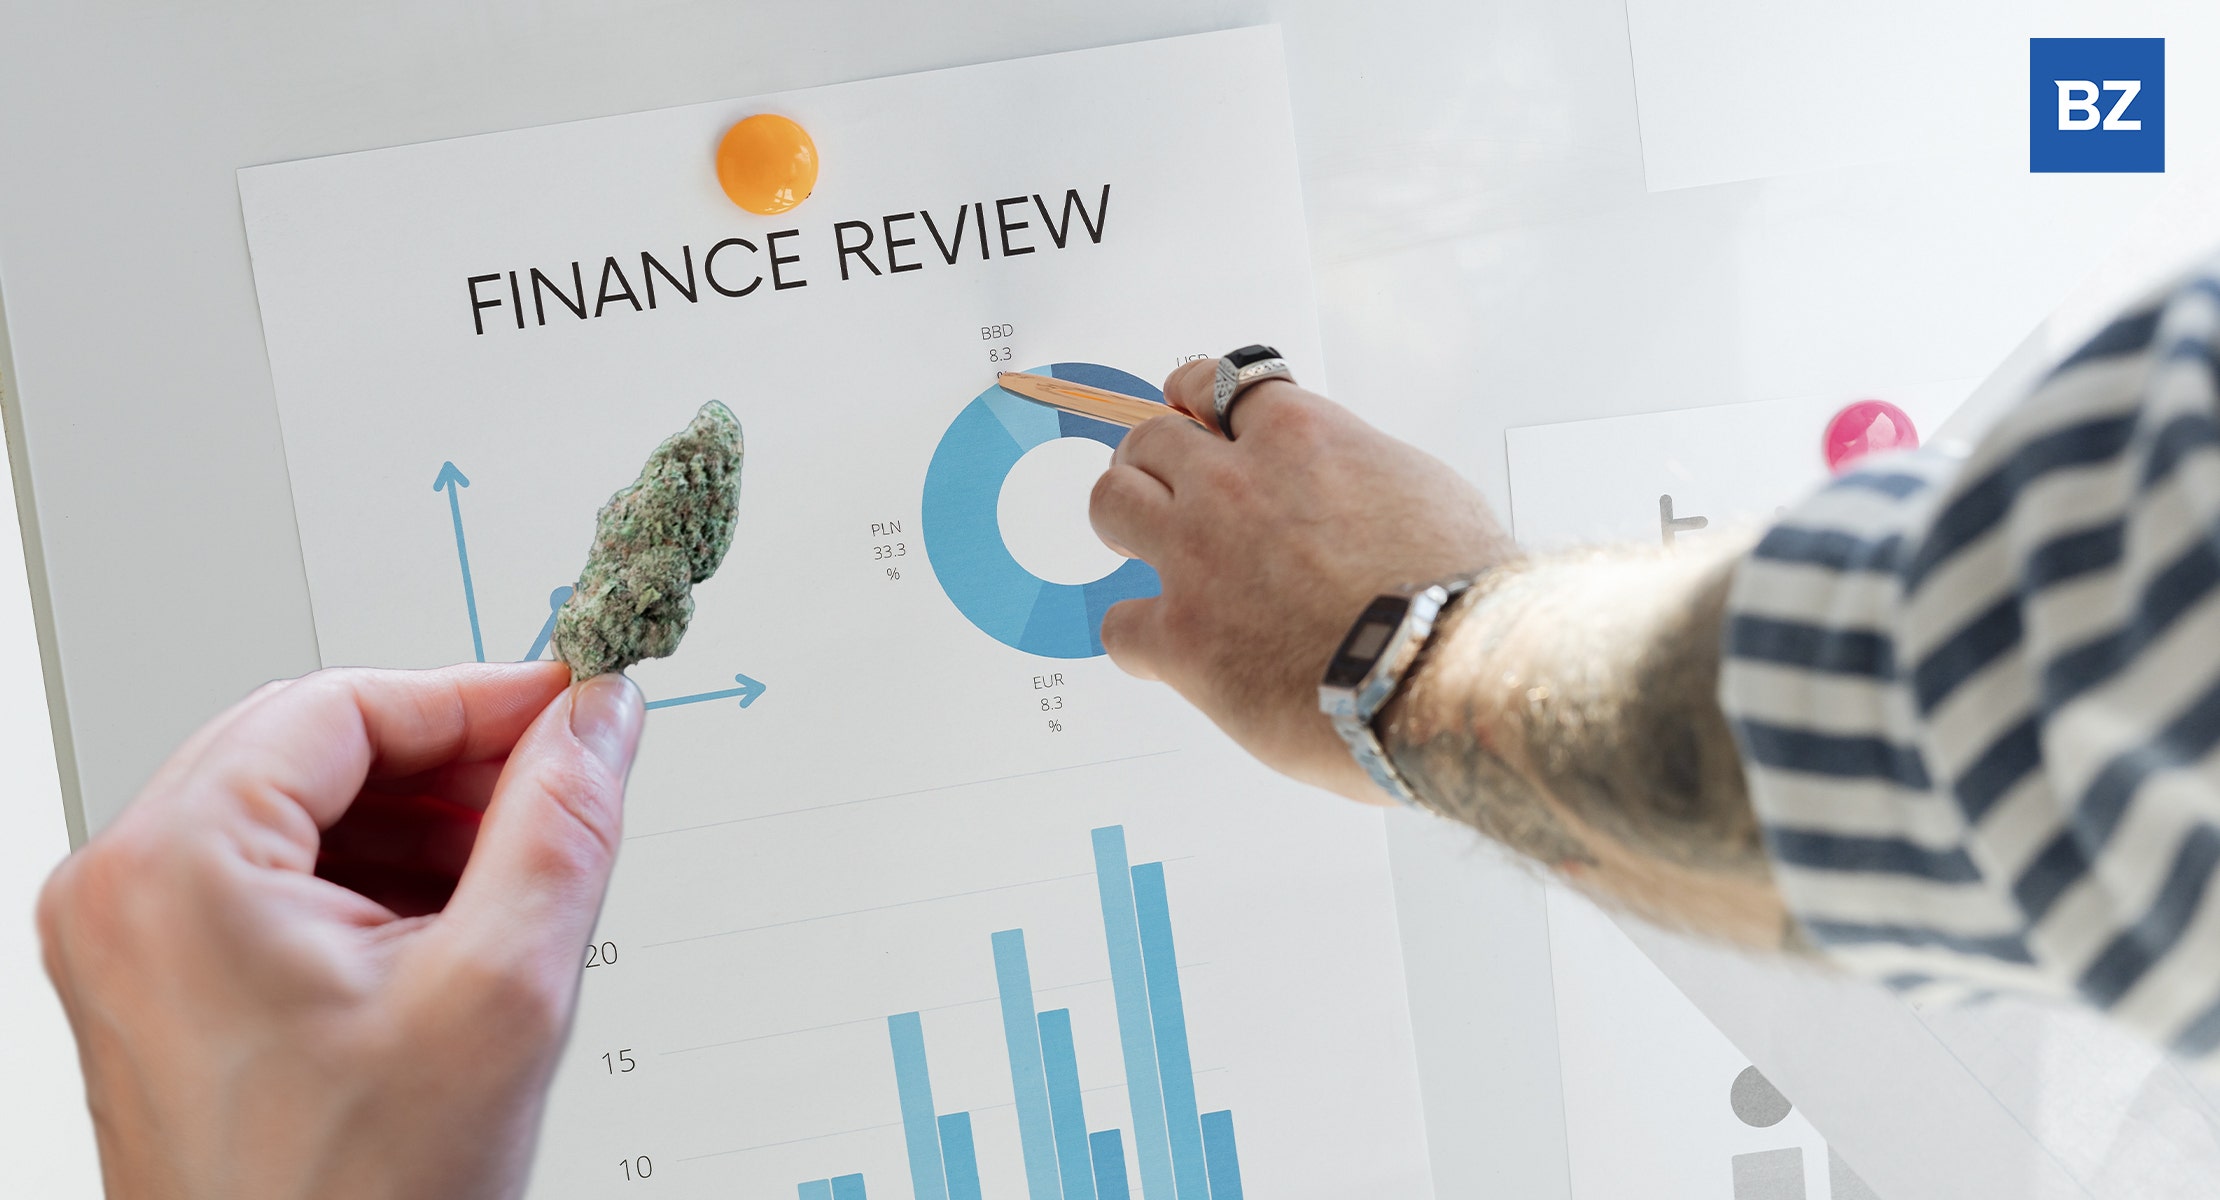 What's Going On With Cannabis Stocks And Markets? Follow These Top Finance Reporters To Stay Ahead Of Trends